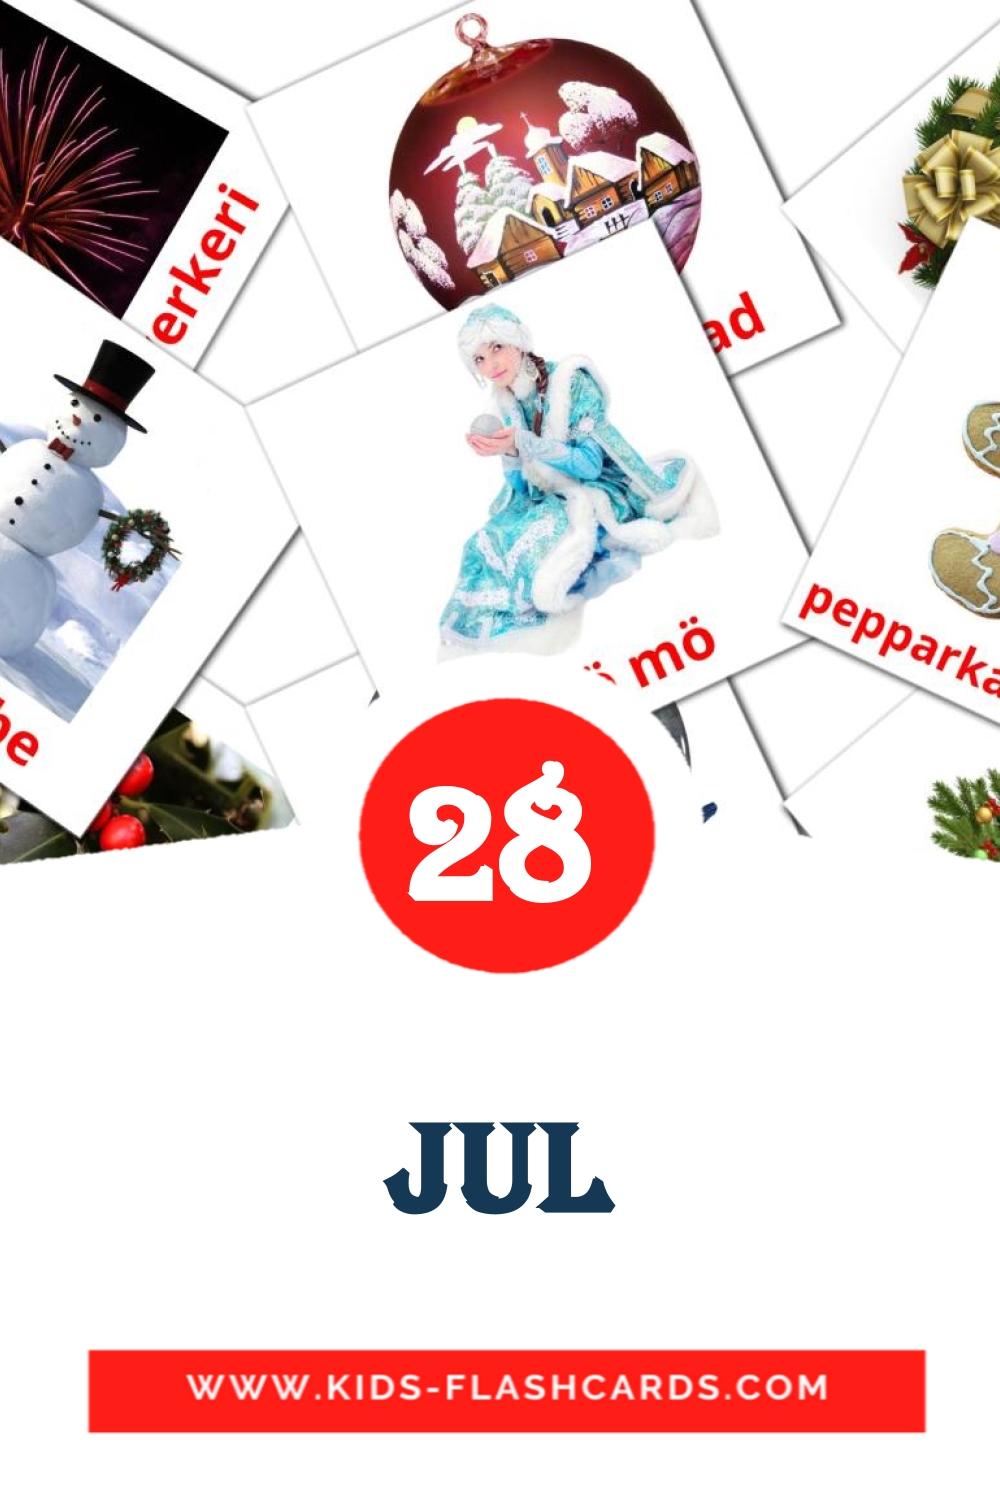 28 jul Picture Cards for Kindergarden in swedish